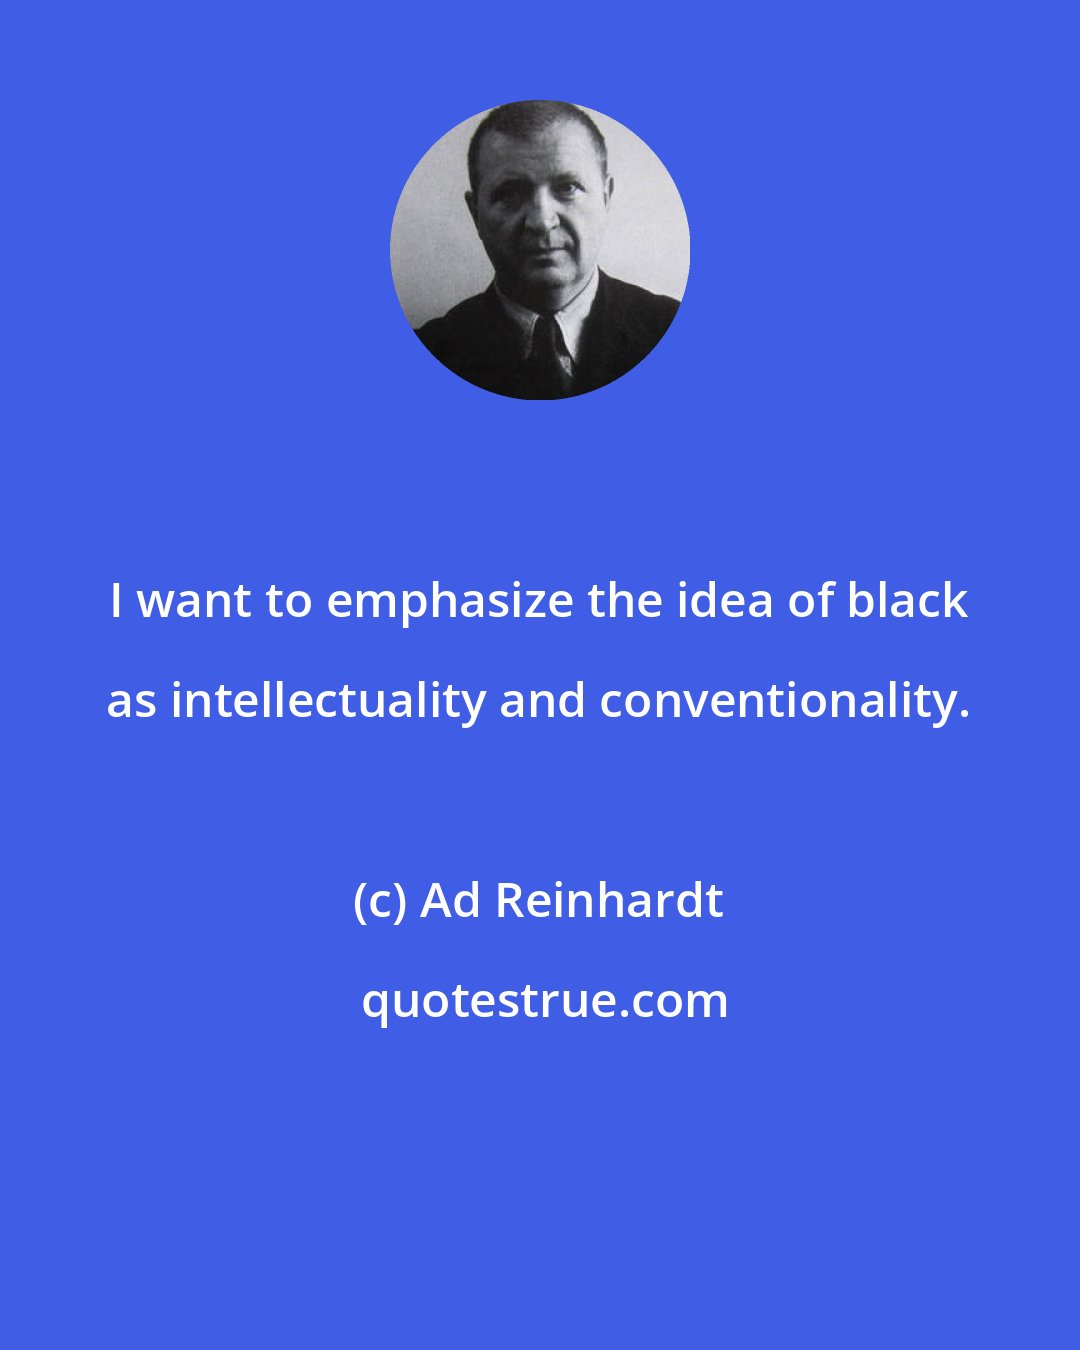 Ad Reinhardt: I want to emphasize the idea of black as intellectuality and conventionality.